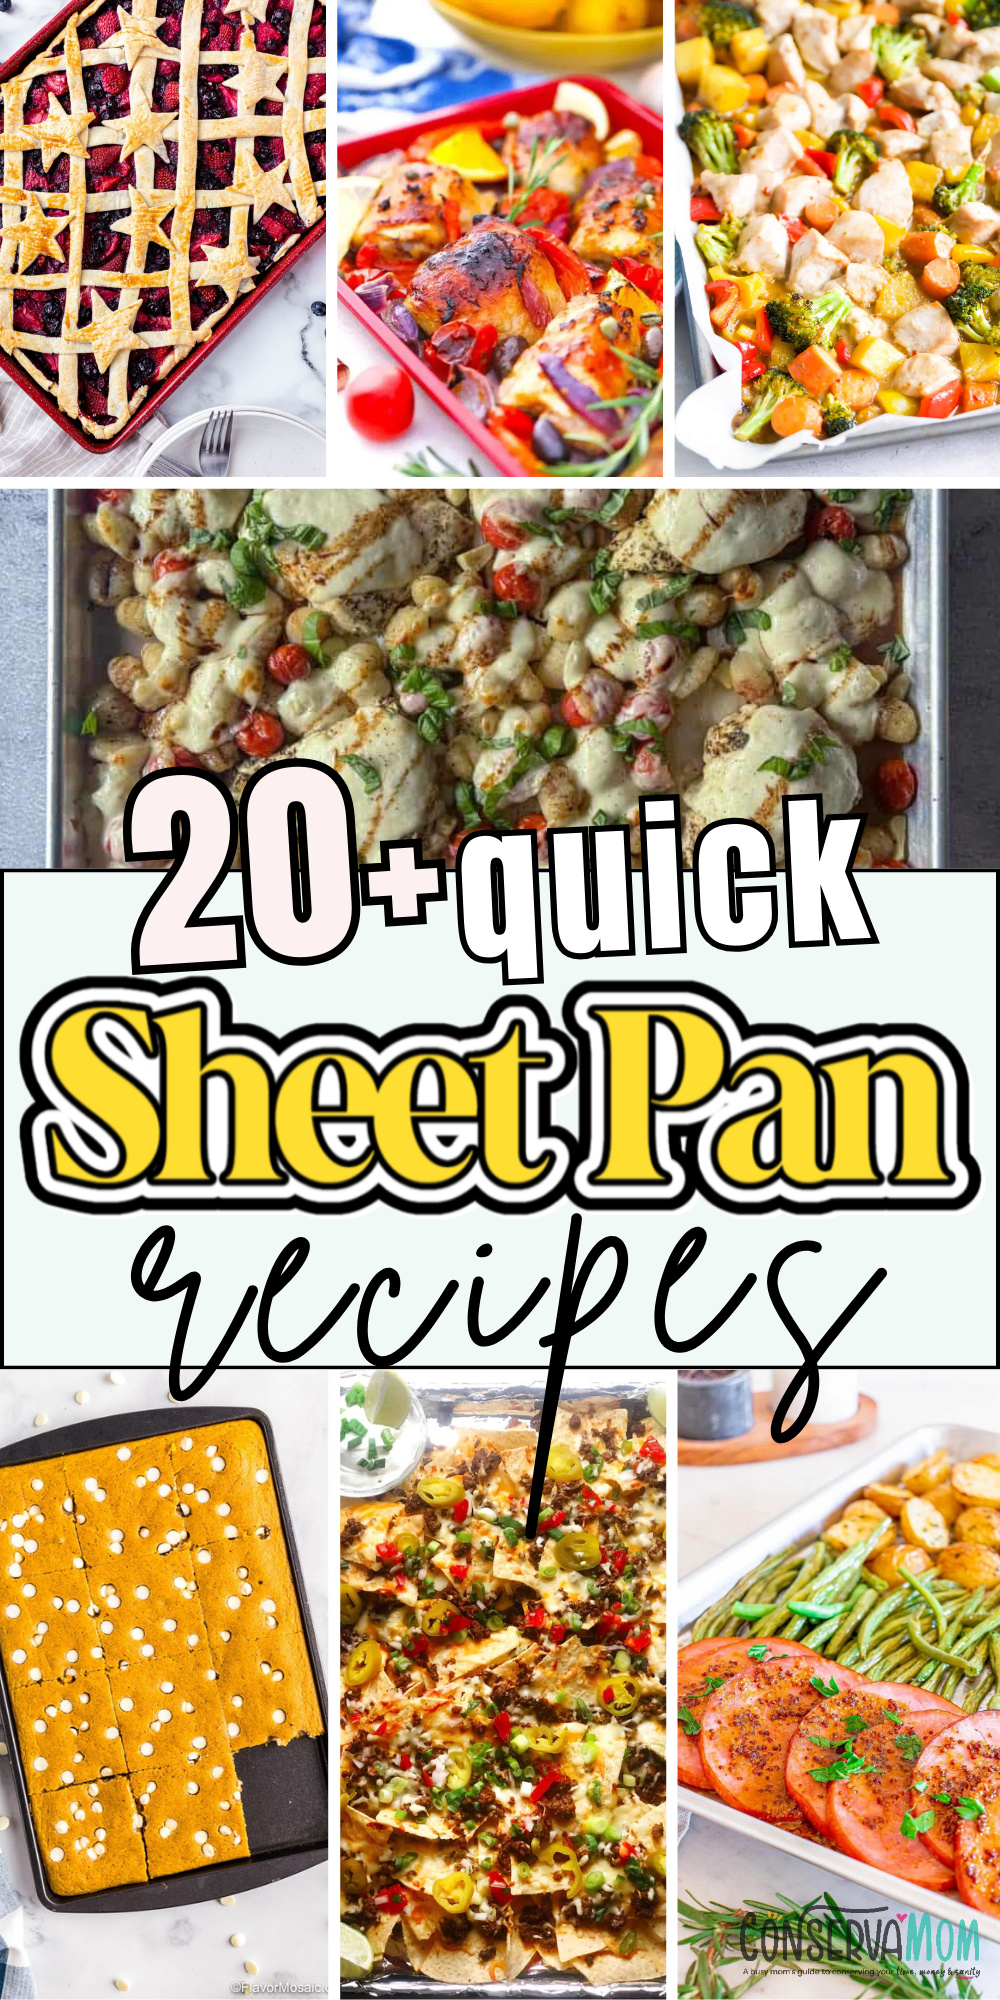 Sheet Pan Recipes for Easy Meals